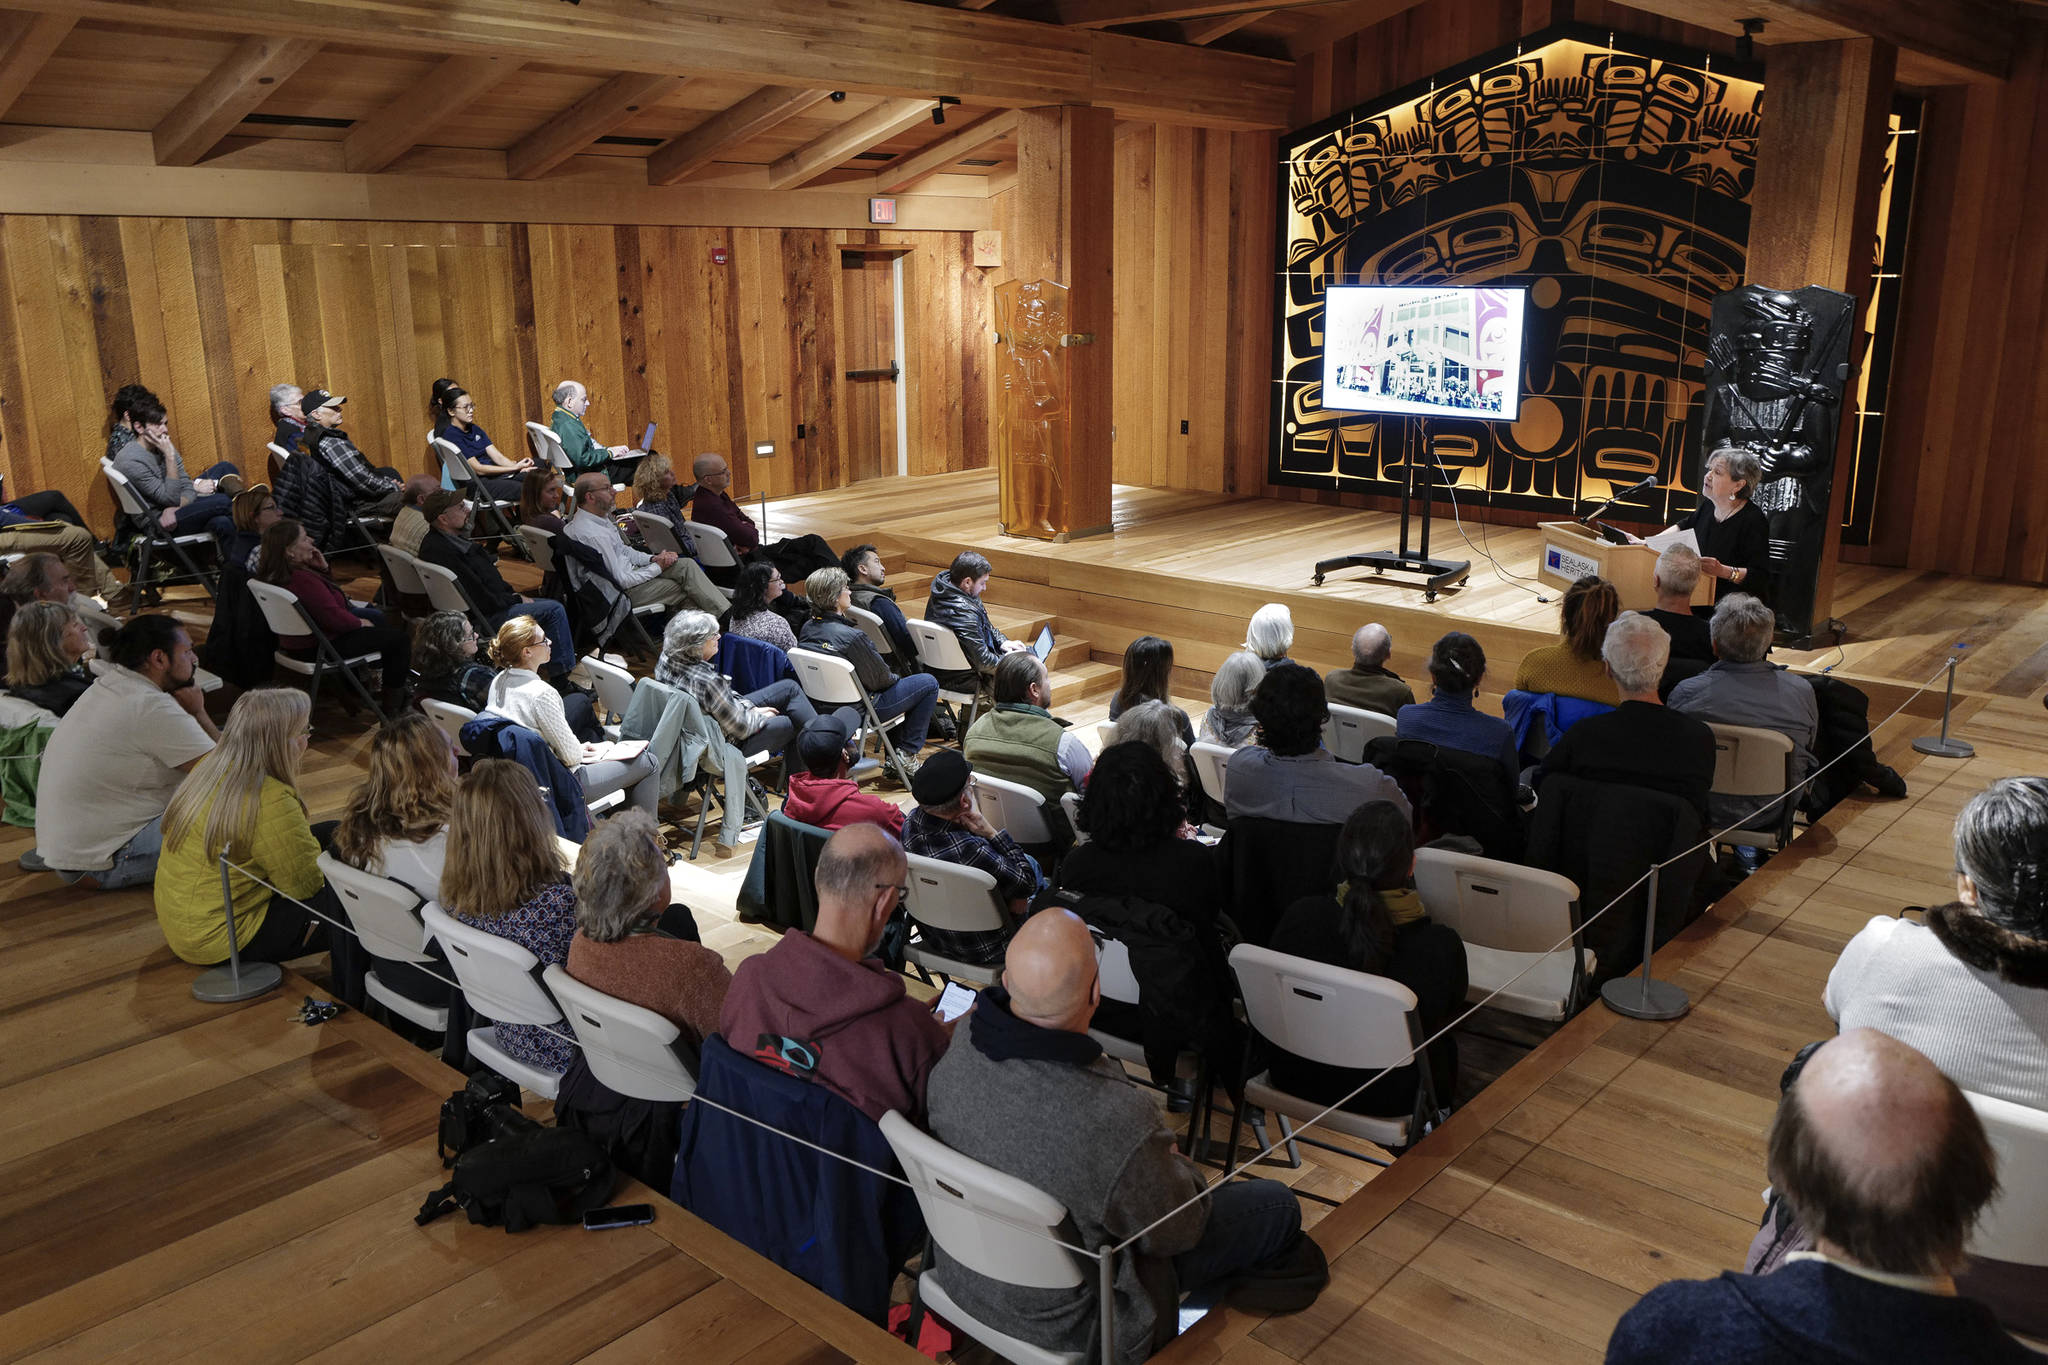 Ernestine Hayes, a Tlingit author and former Alaska State Writer Laureate from 2016-2018, gives a lecture on Juneau’s Indian Village at the Walter Soboleff Center on Monday, Nov. 18, 2019. The lecture is sponsored by the Sealaska Heritage Institute. (Michael Penn | Juneau Empire)